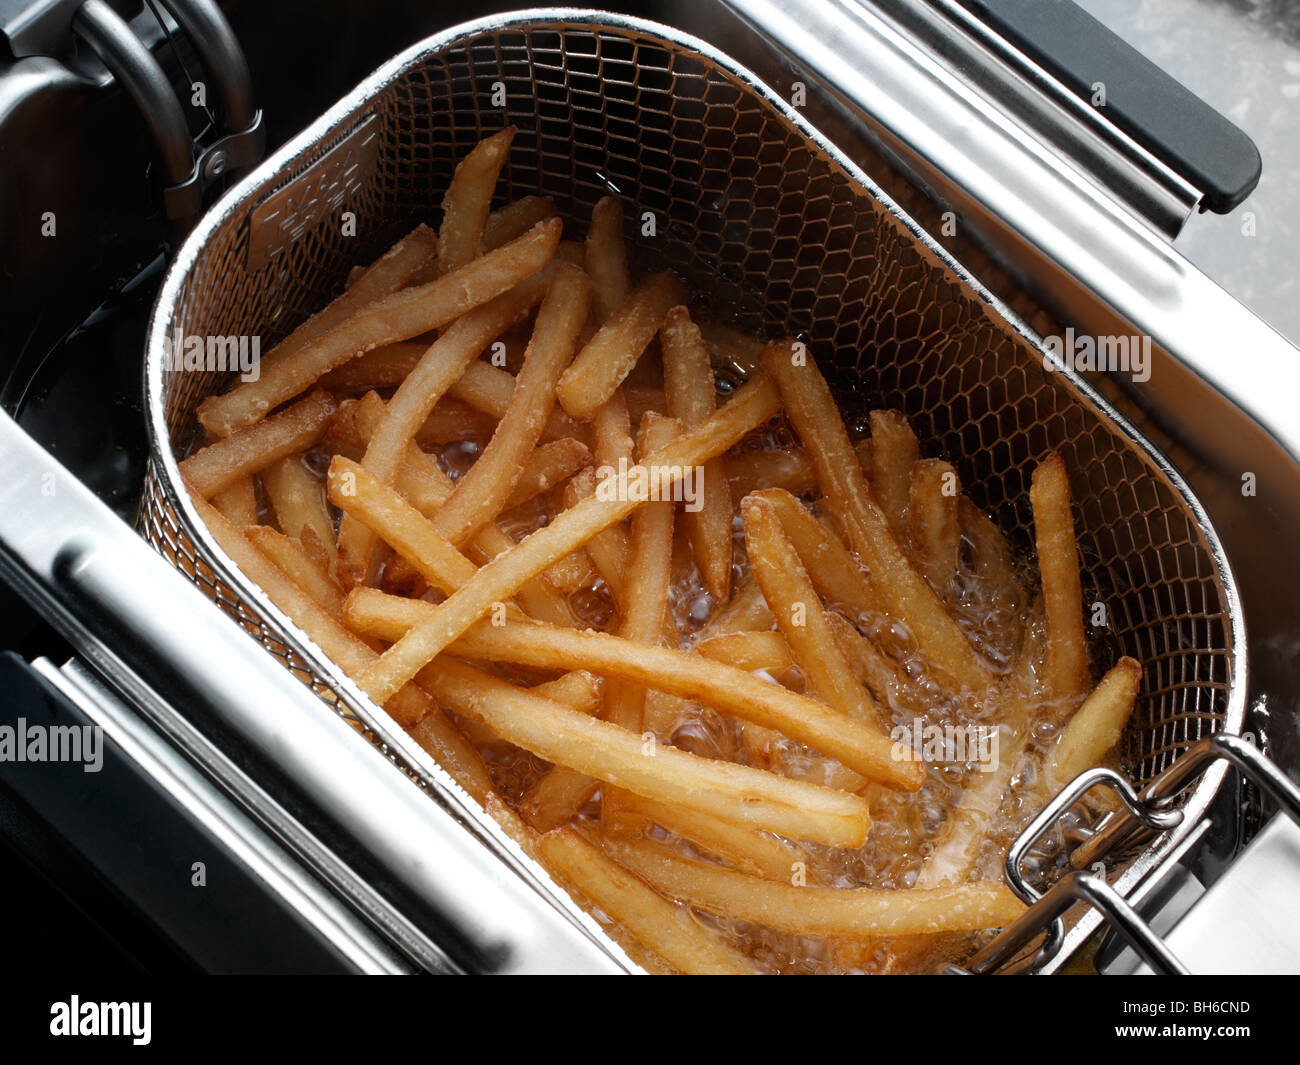 Chips deep fat frying Stock Photo